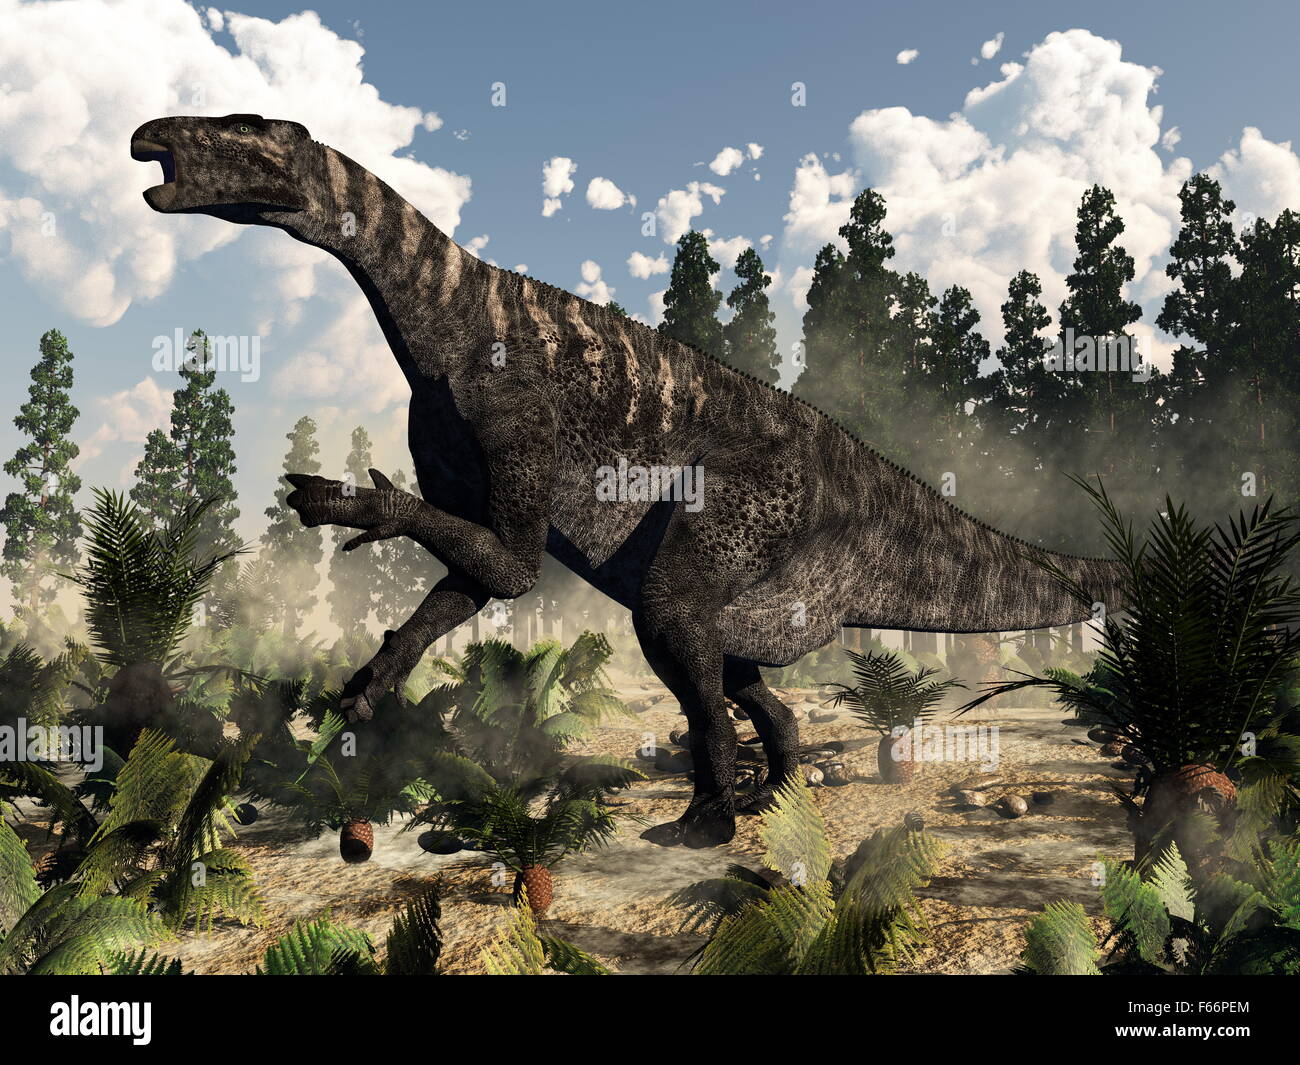 Iguanodon dinosaur roaring while walking among ferns, cycas and wollemia plants by day with clouds - 3D render Stock Photo